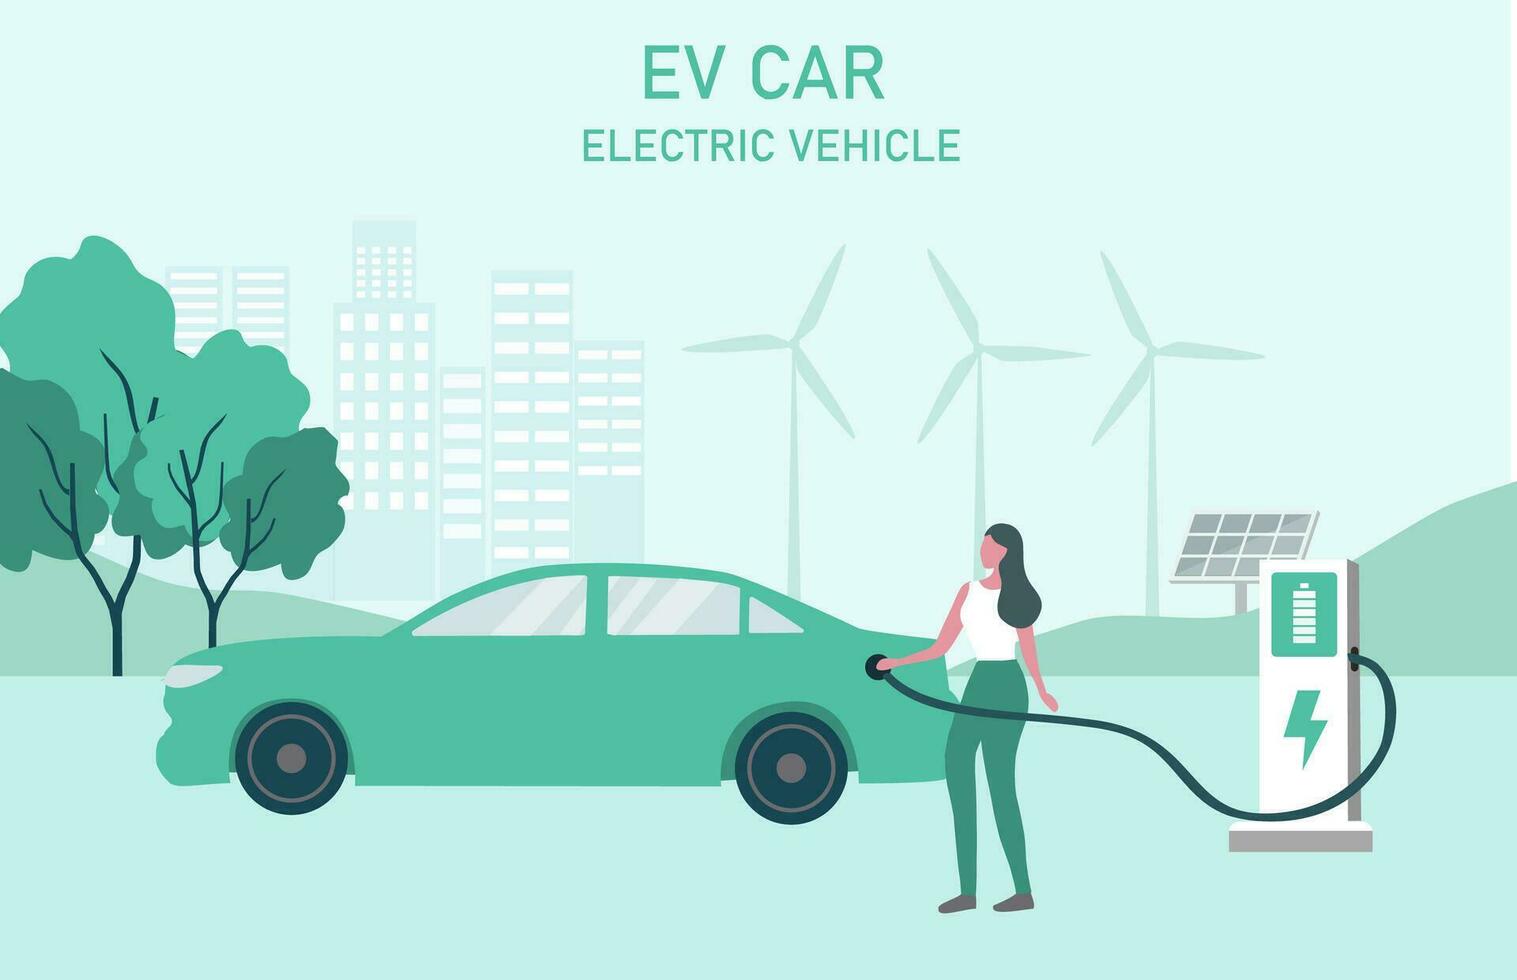 Electric car, EV car, car charging battery at electric charging station with solar panel and wind turbines. Sustainable green energy for ecology environment. Futuristic transportation vector